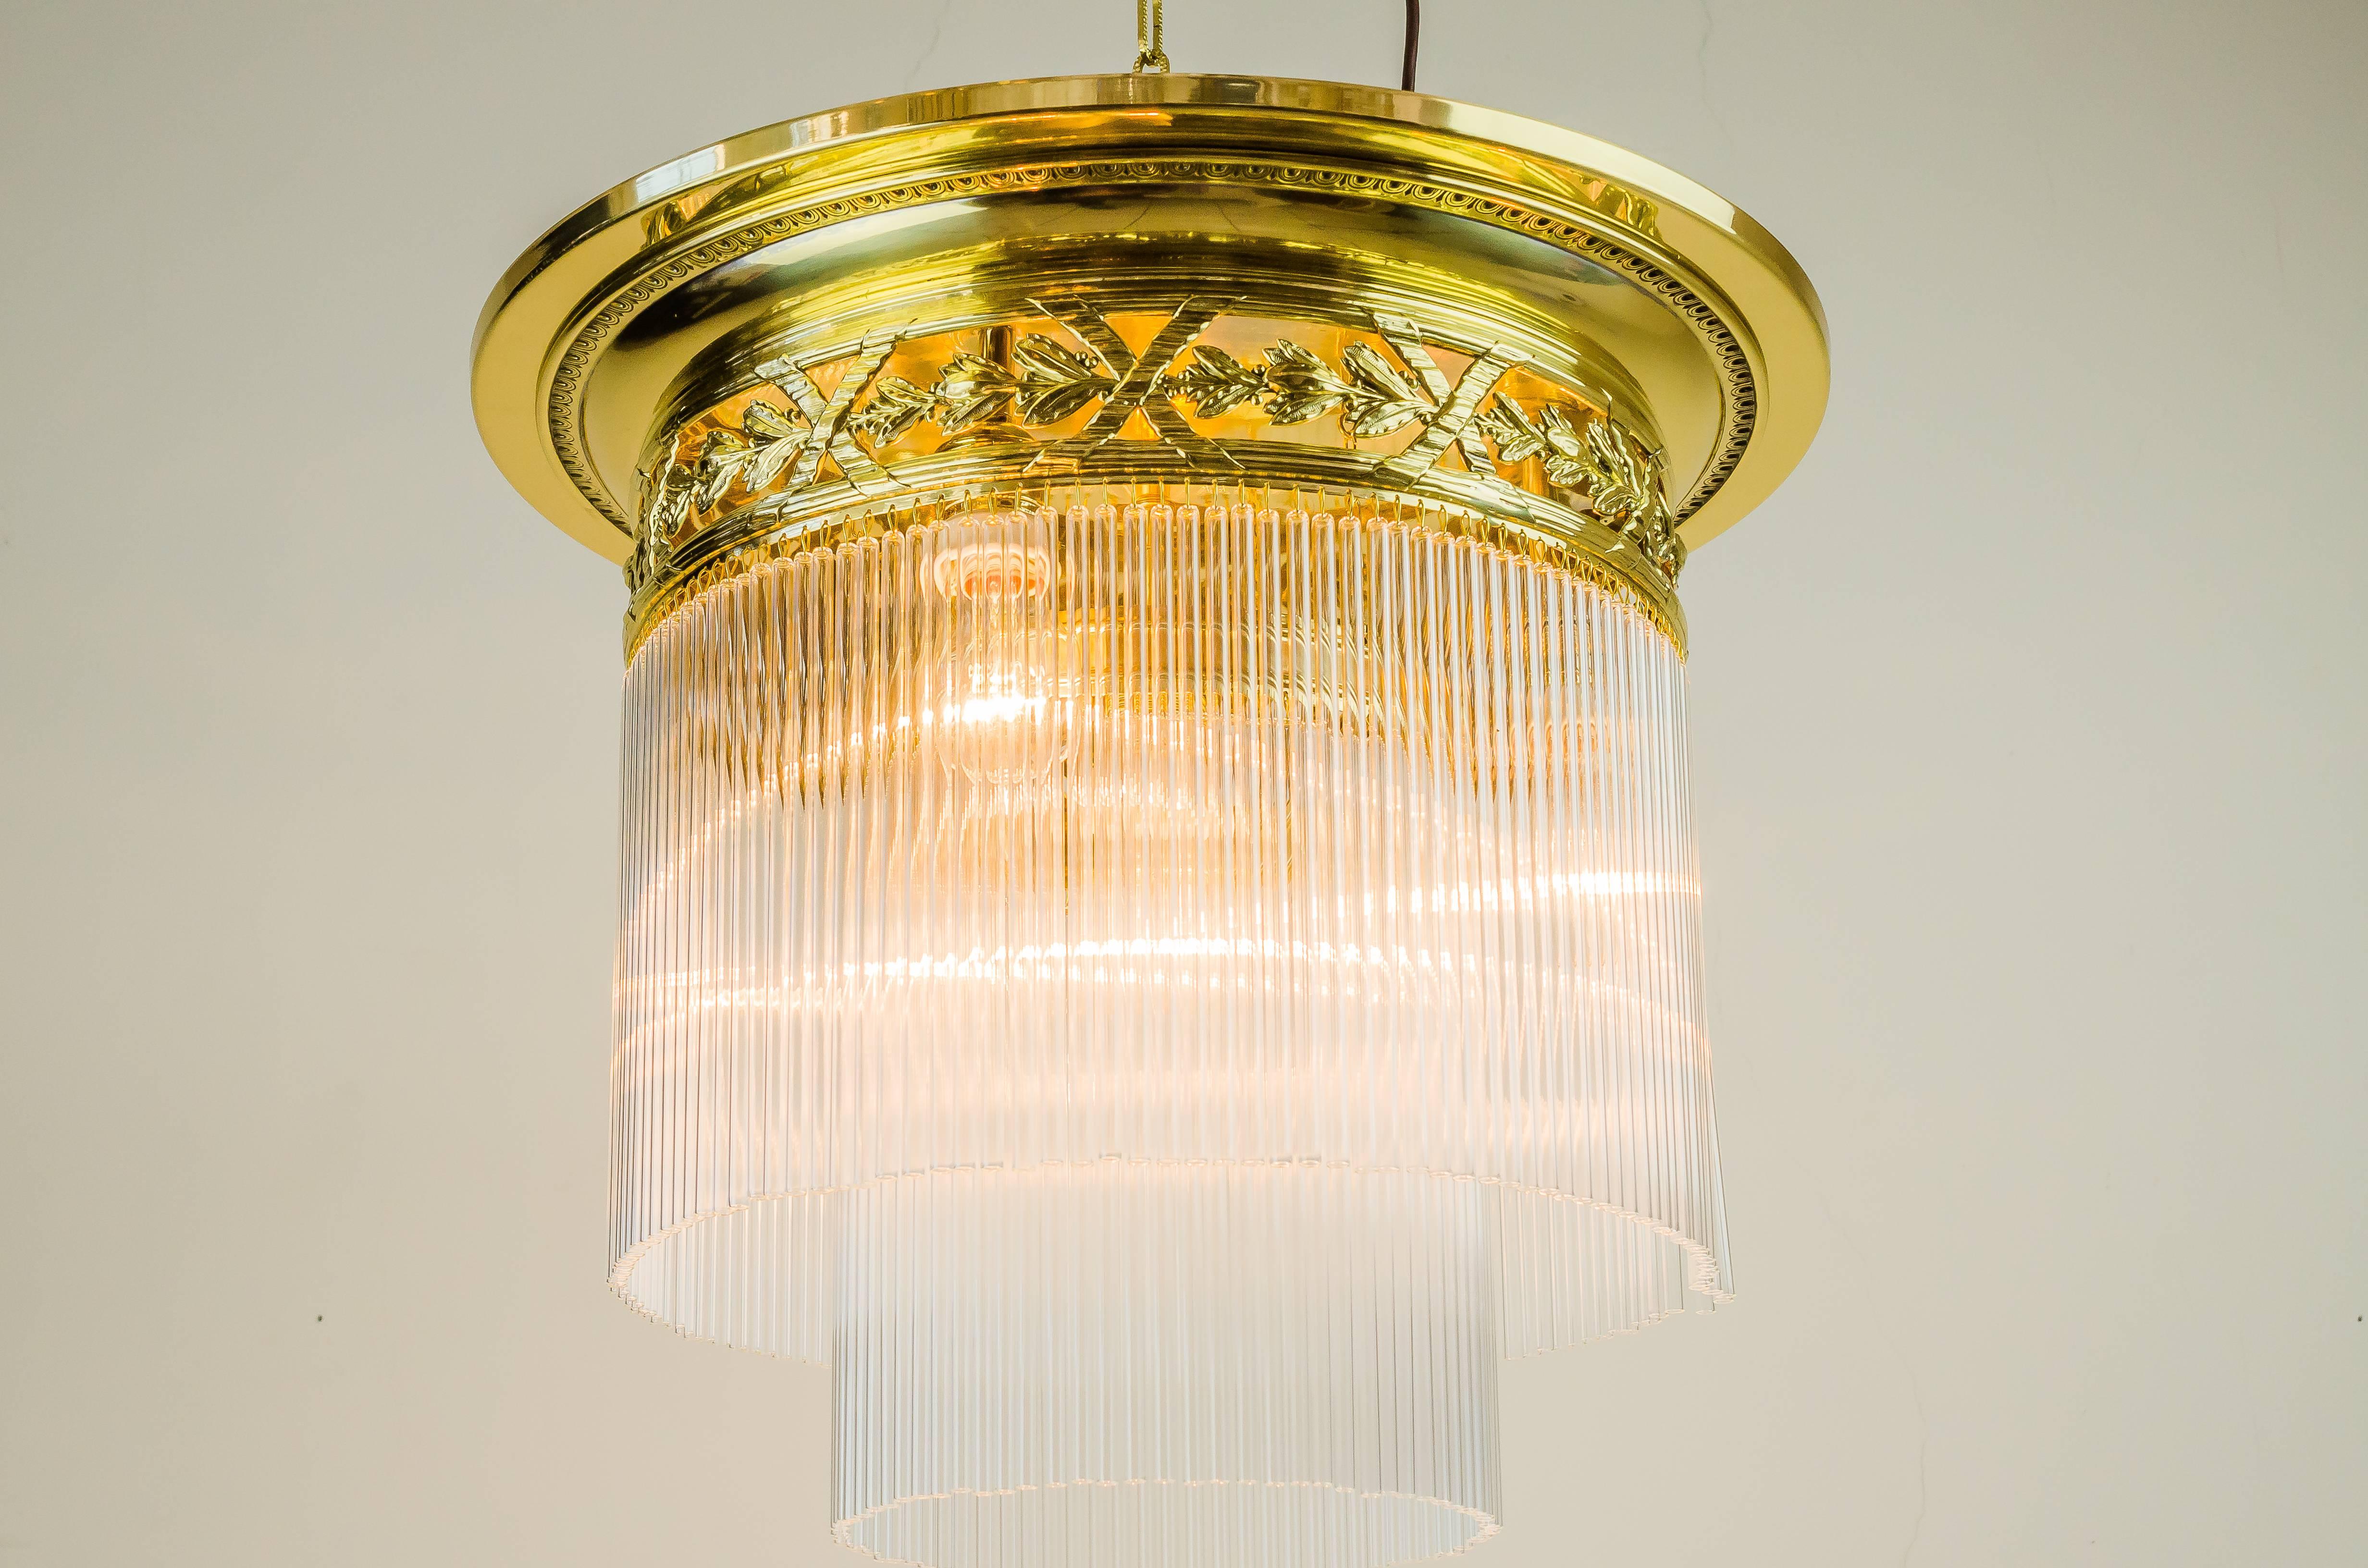 Lacquered Beautiful and Big Jugendstil Ceiling Lamp with Glass Sticks